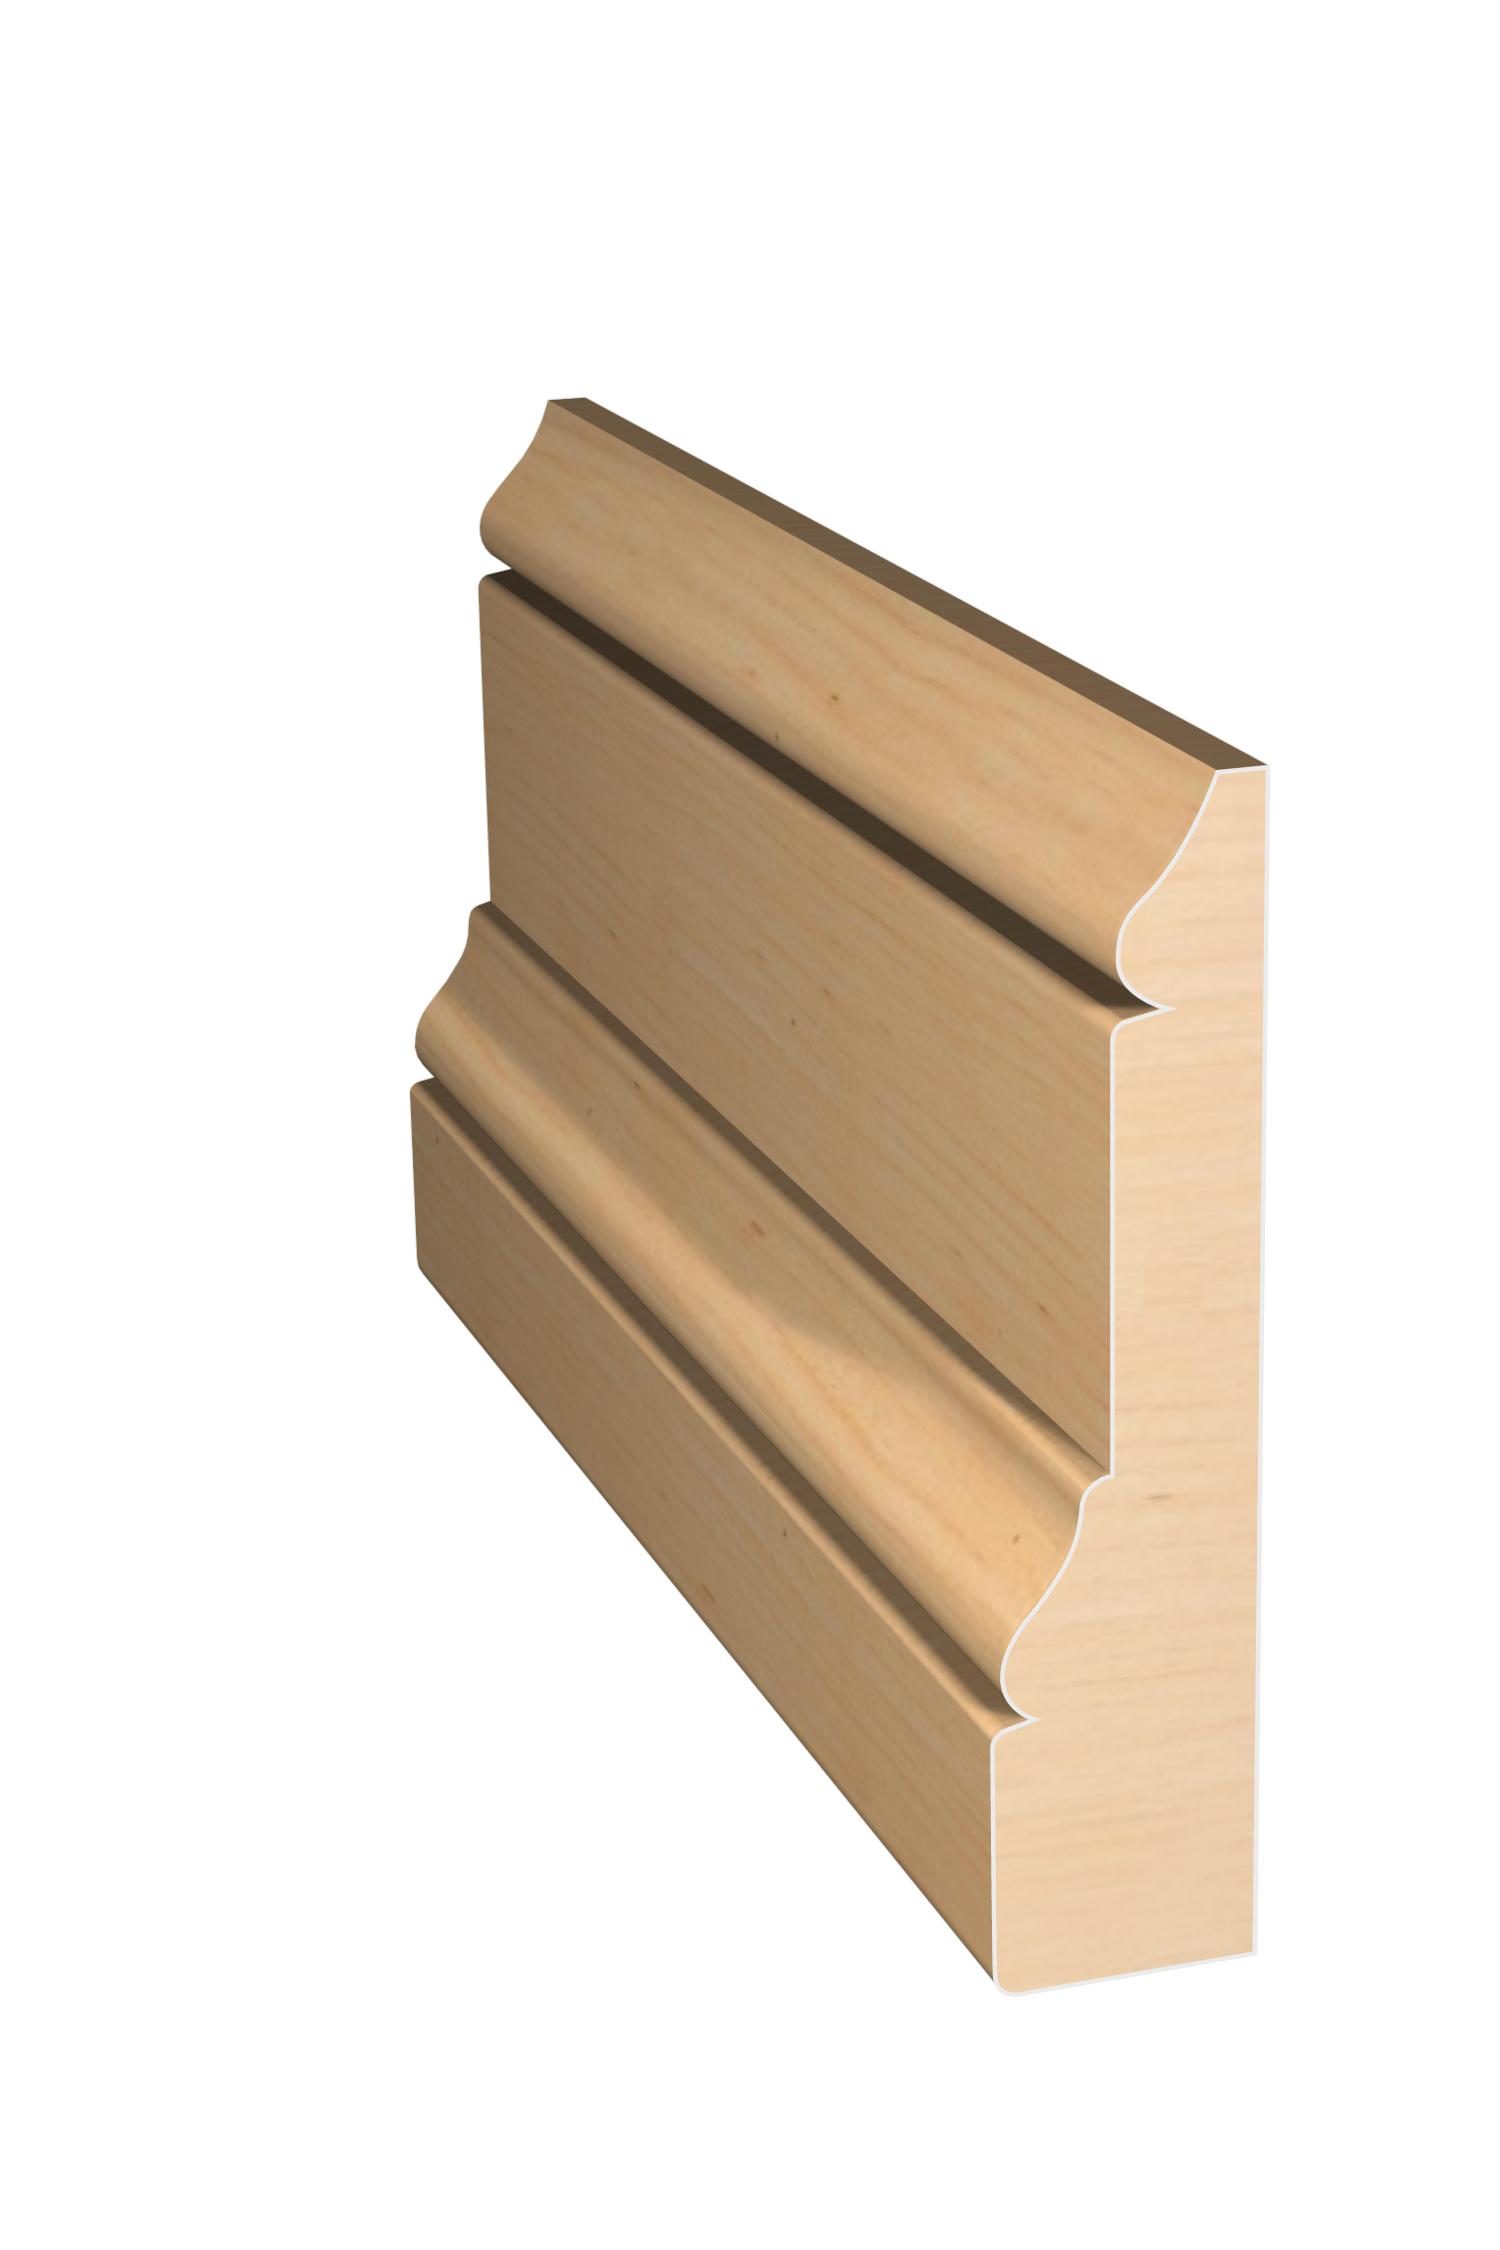 Three dimensional rendering of custom casing wood molding CAPL31428 made by Public Lumber Company in Detroit.